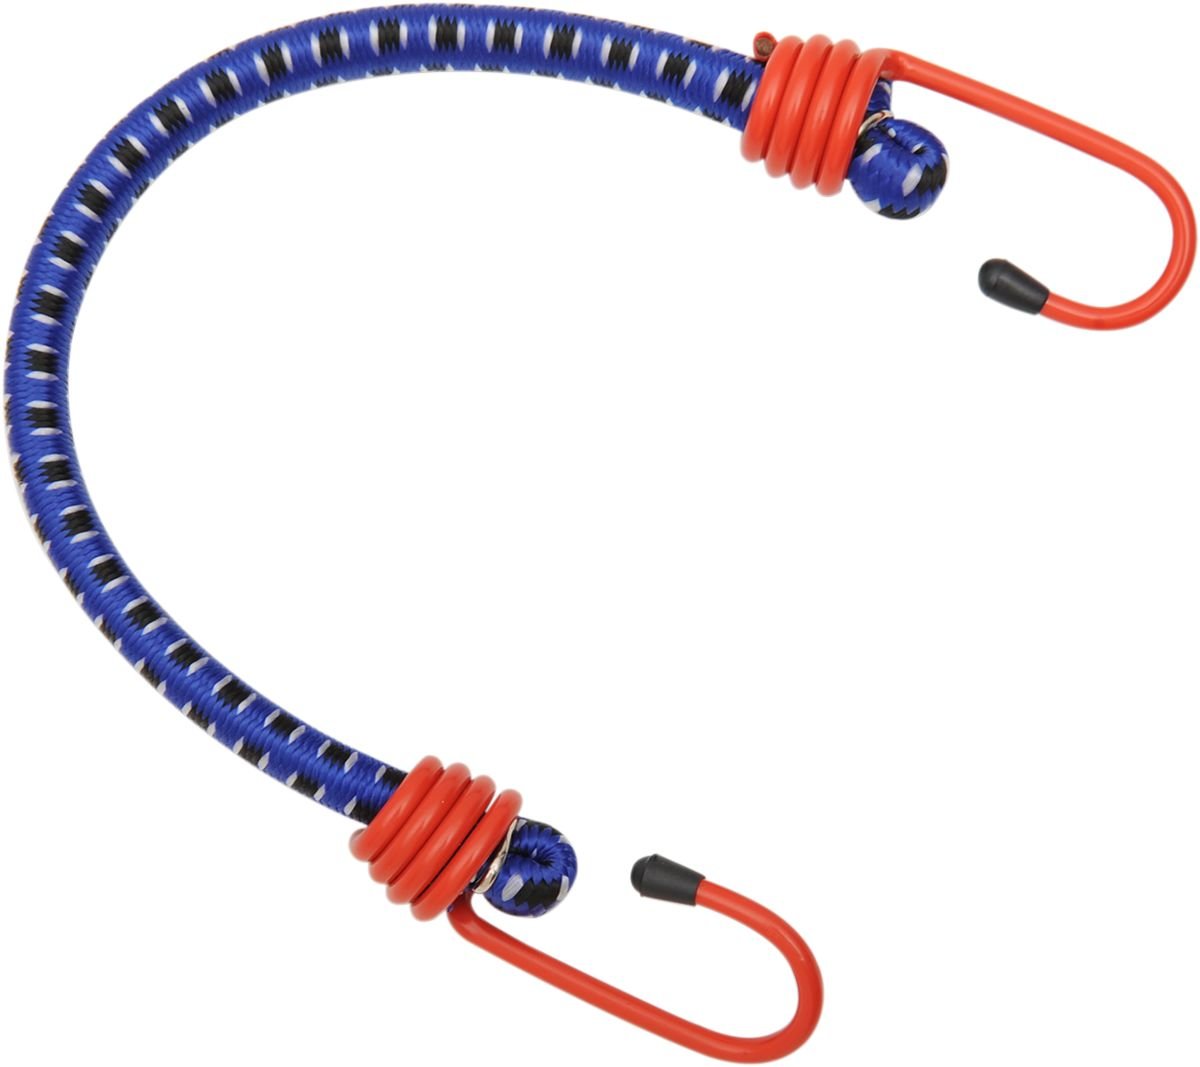 PARTS UNLIMITED Bungee Cord 12" 2 Hook von Parts Unlimited